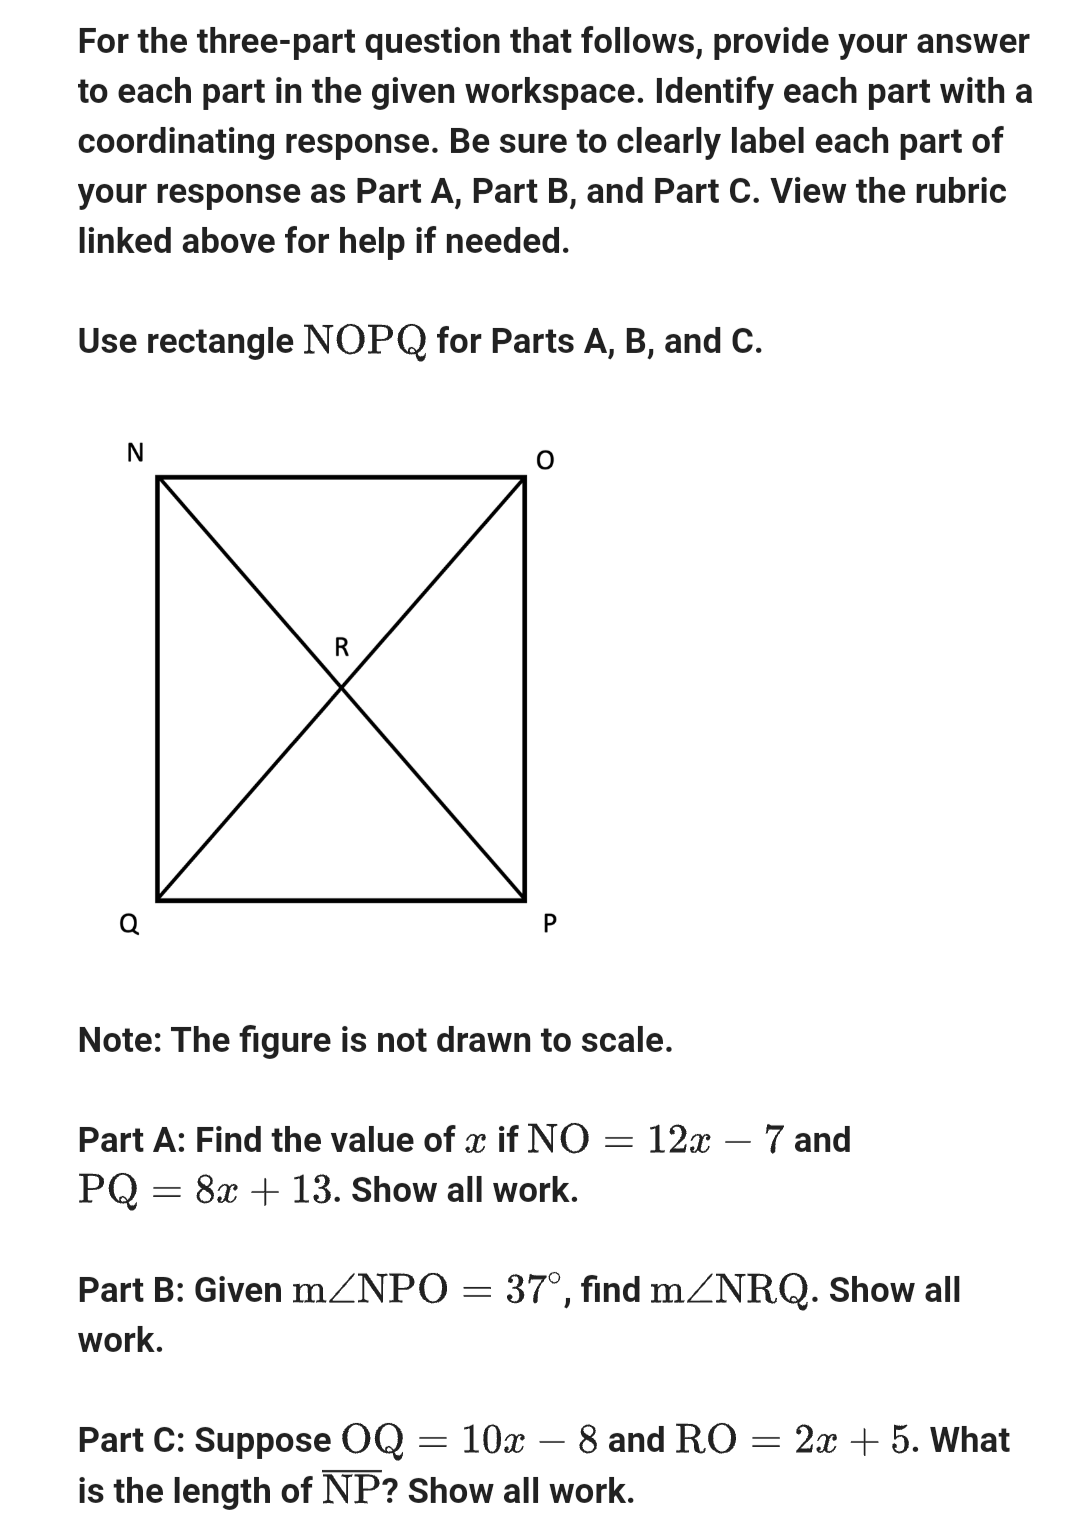 For the three-part question that follows, provide your answer
to each part in the given workspace. Identify each part with a
coordinating response. Be sure to clearly label each part of
your response as Part A, Part B, and Part C. View the rubric
linked above for help if needed.
Use rectangle NOPQ for Parts A, B, and C.
N
o
R
O
P
Note: The figure is not drawn to scale.
Part A: Find the value of x if NO :
=
PQ = 8x + 13. Show all work.
12x - 7 and
Part B: Given m/NPO = 37°, find m/NRQ. Show all
work.
Part C: Suppose OQ = 10x – 8 and RO = 2x + 5. What
is the length of NP? Show all work.